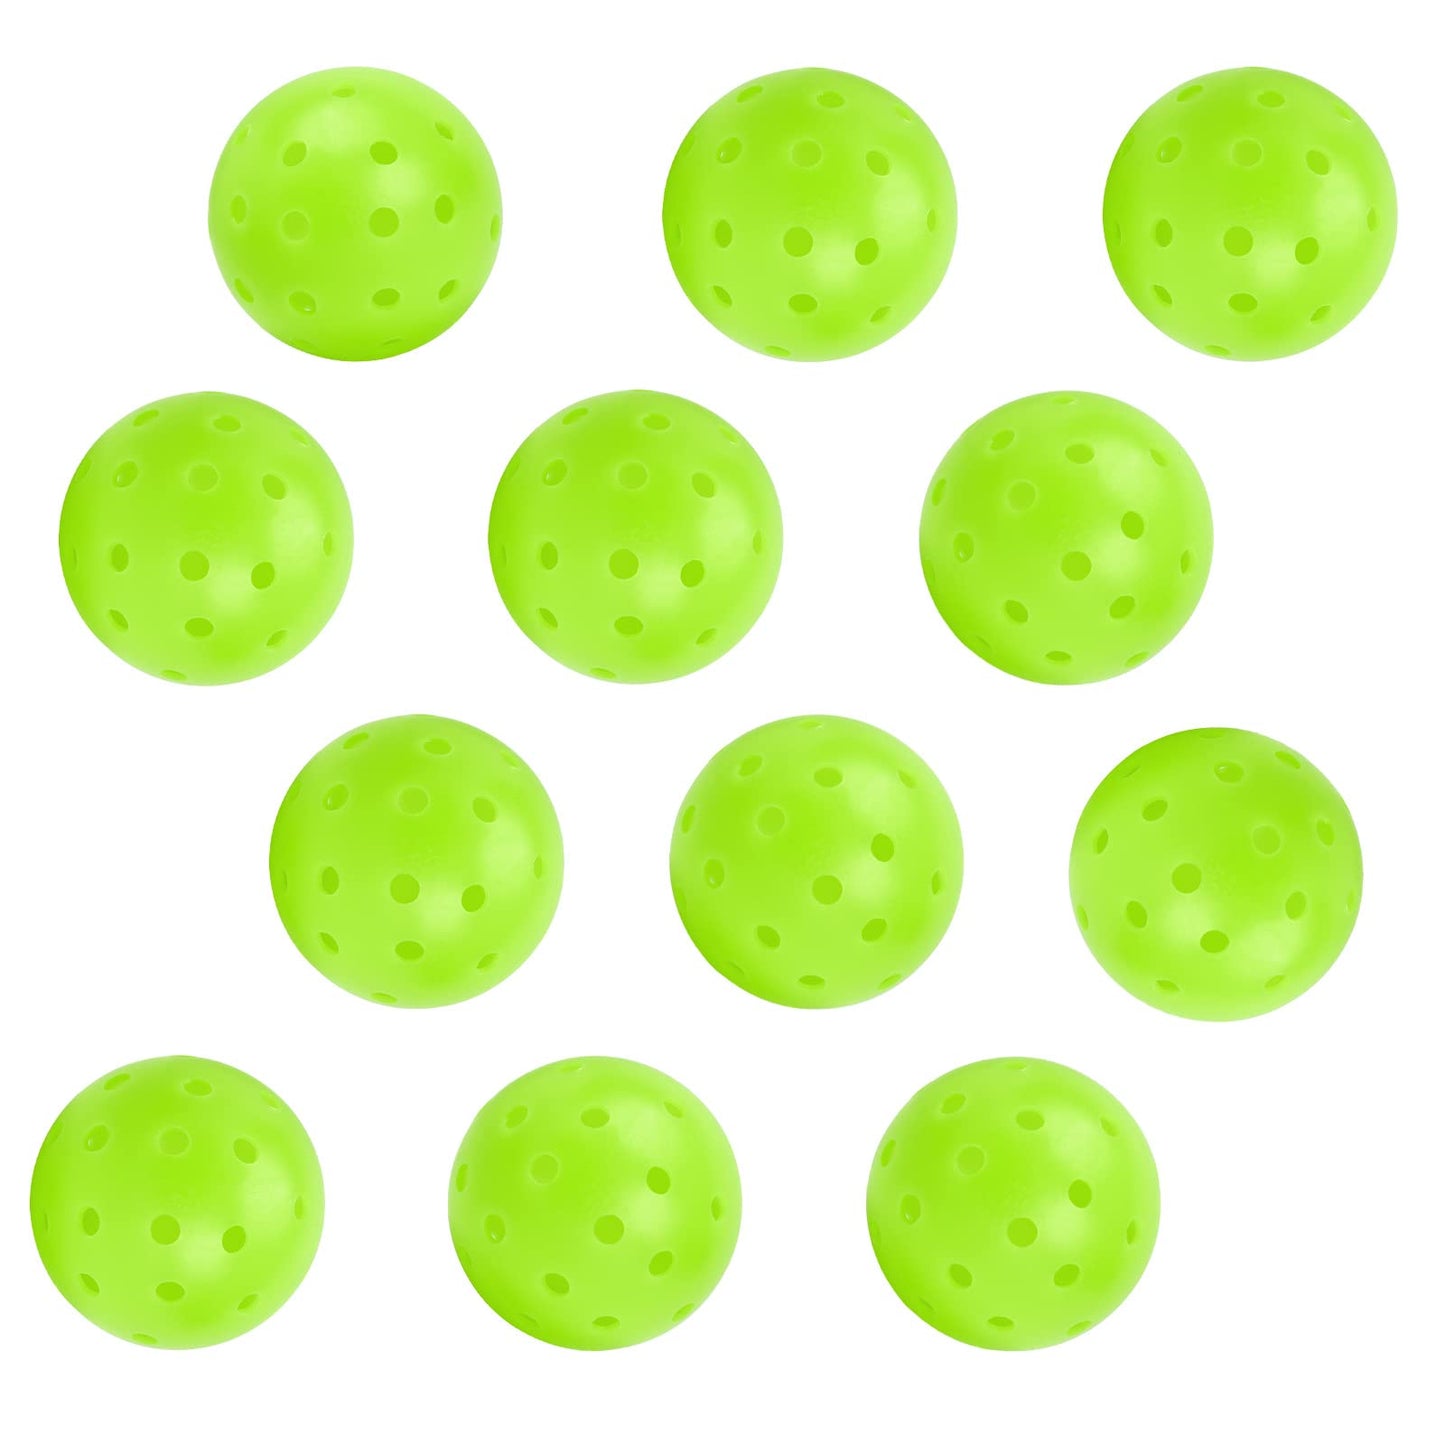 Outdoor Pickleballs (12 Pack) -Specifically Designed and Optimized for Pickleball